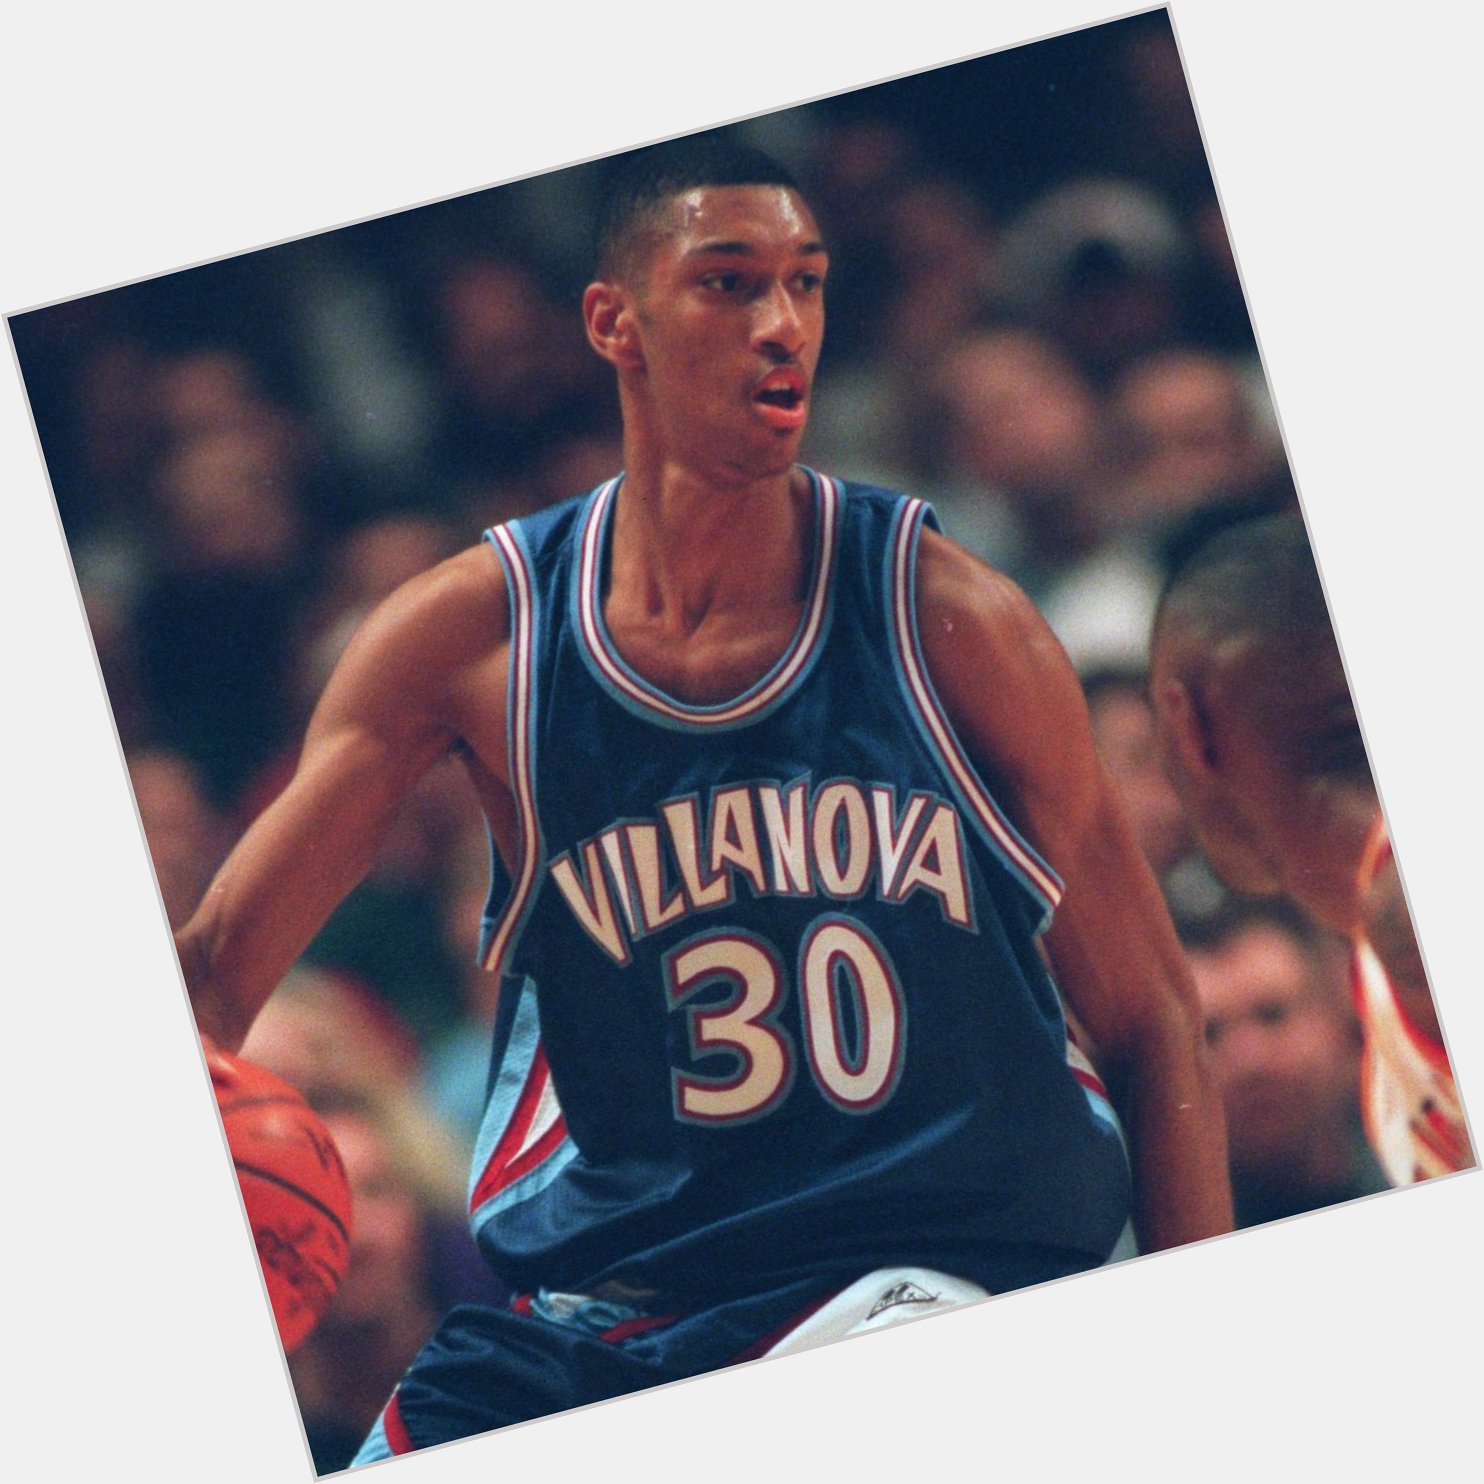 Join us in wishing a Happy Birthday to Villanova legend and all-time leading scorer Kerry Kittles!! 